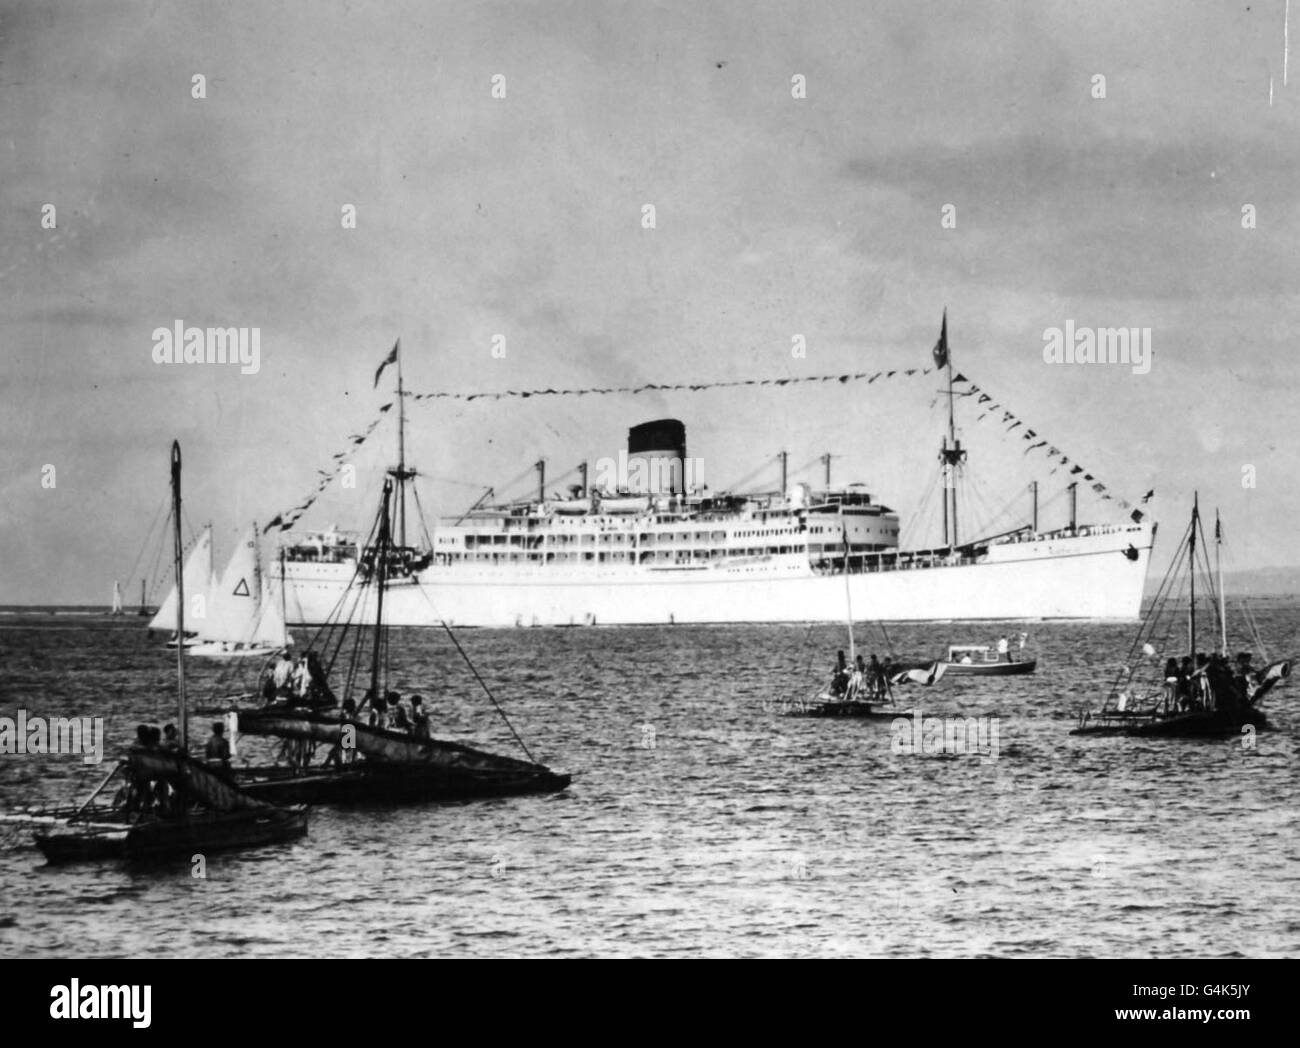 Native war boats (in foreground) welcome the liner Gothic, in which the Queen and the Duke of Edinburgh are voyaging on their Commonwealth tour, as it enters the reef at Suva, Fiji. Stock Photo